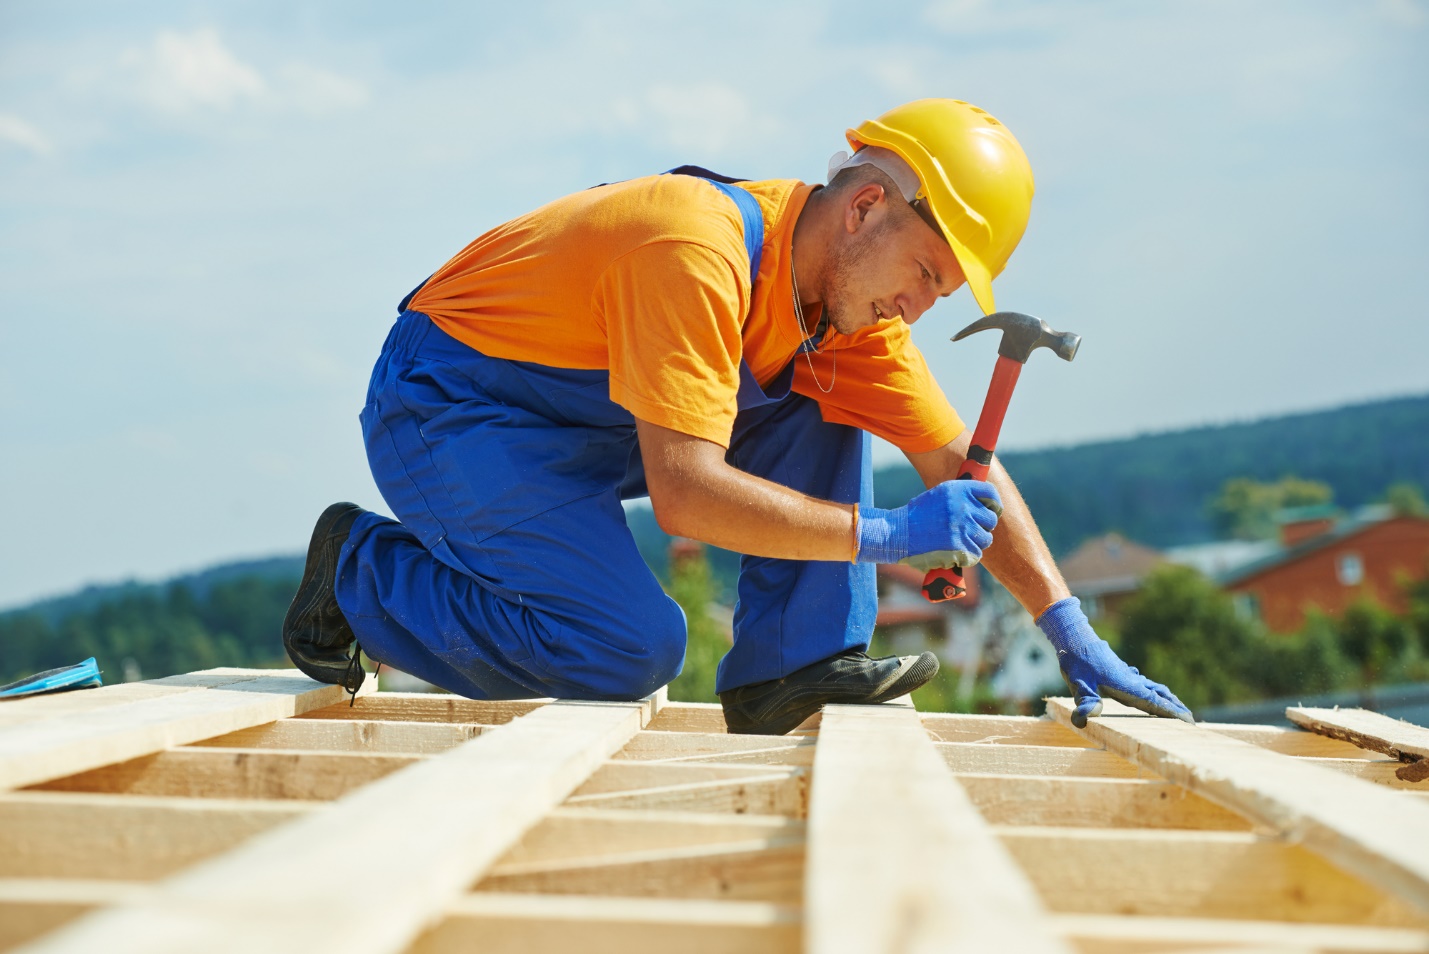 A person wearing a hard hat and working on a roof

Description automatically generated with low confidence